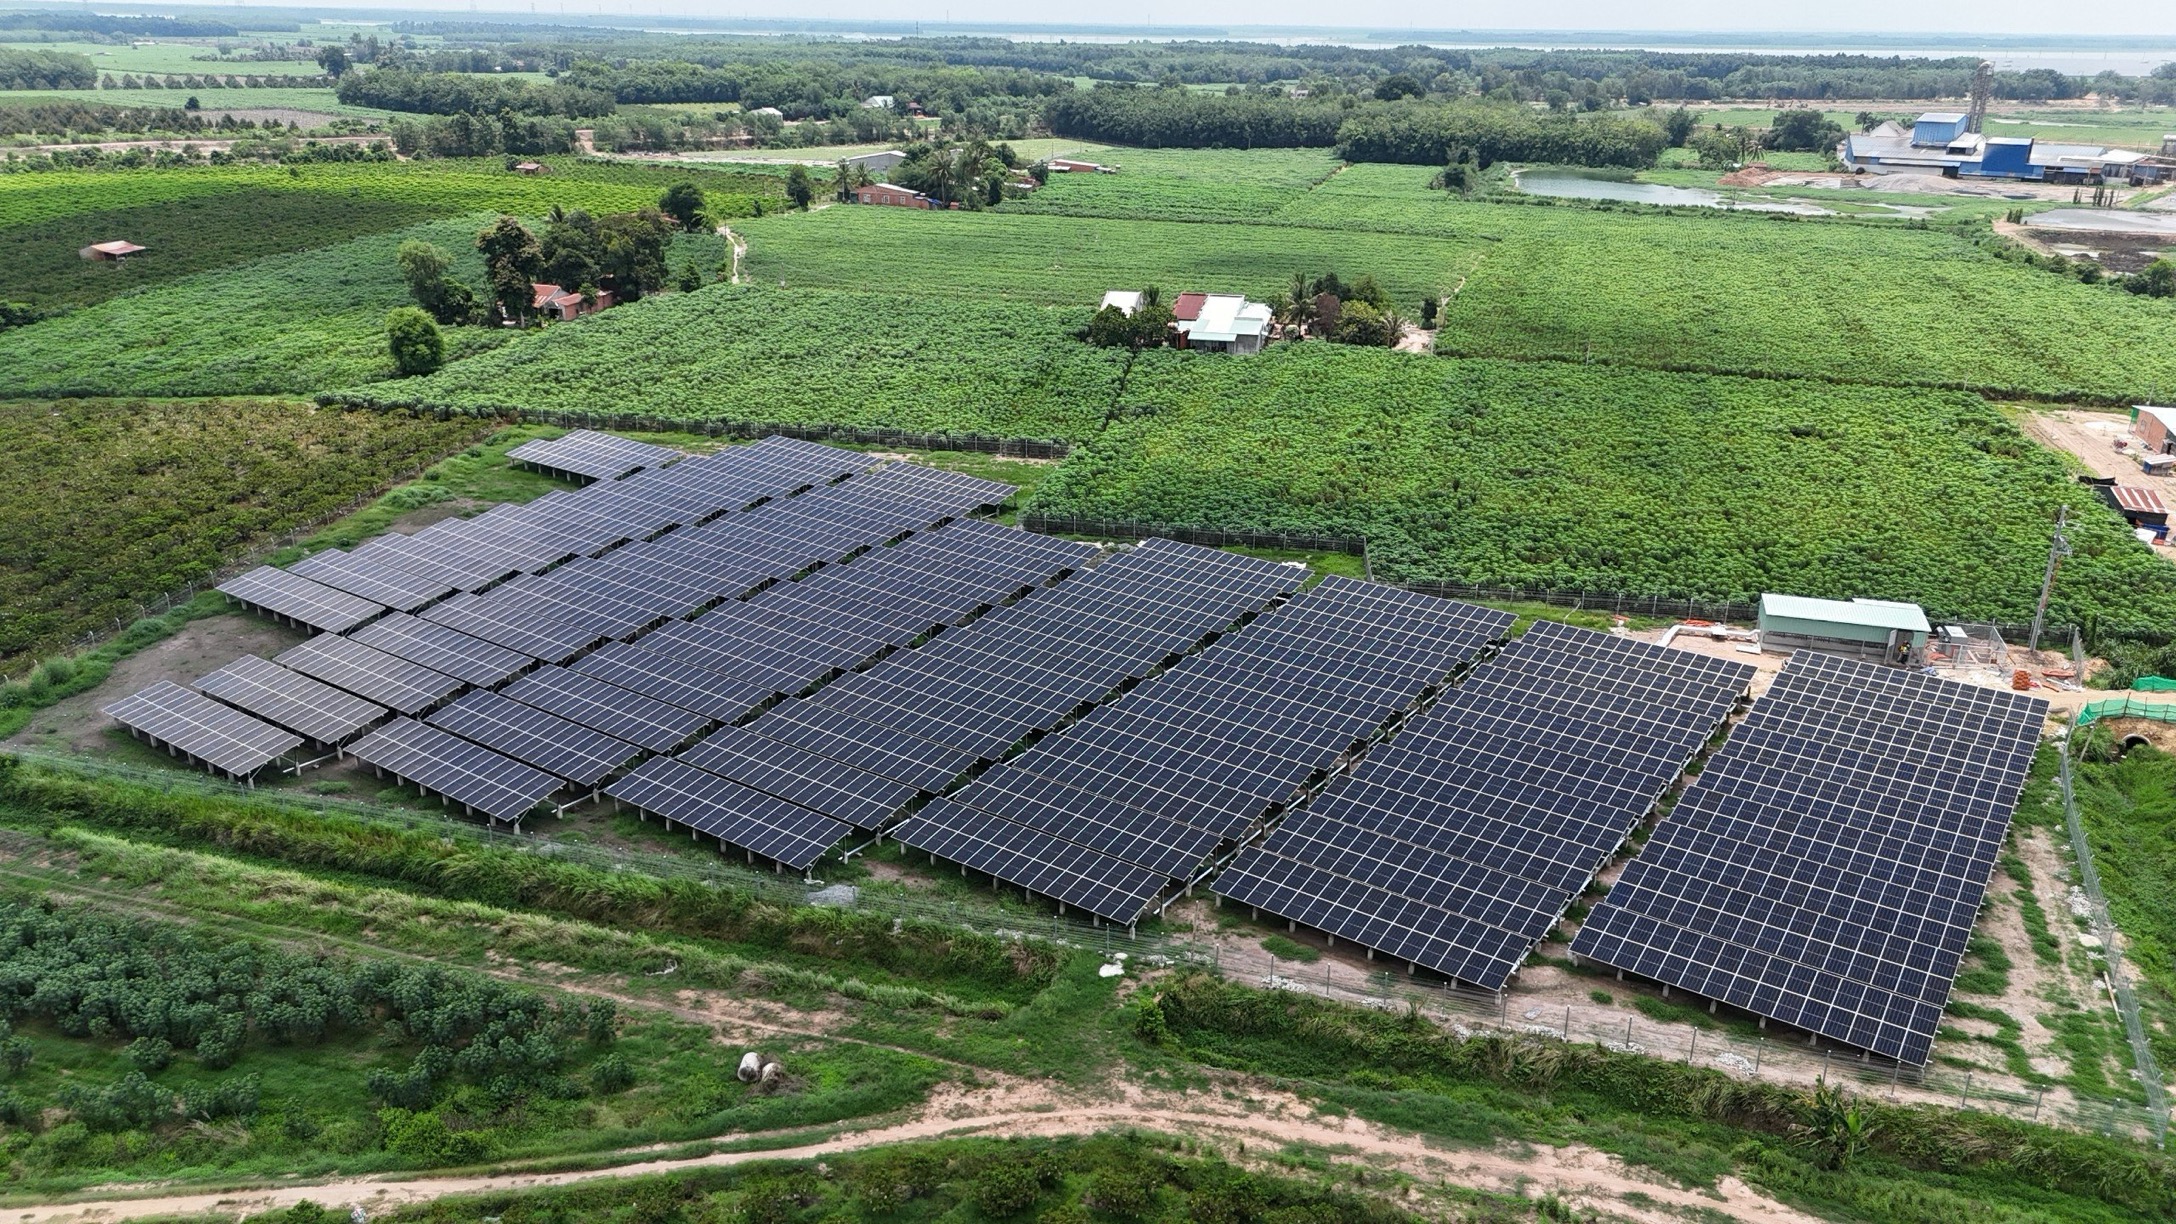 Hiep Phat’s site where the agri-PV is installed by TotalEnergies